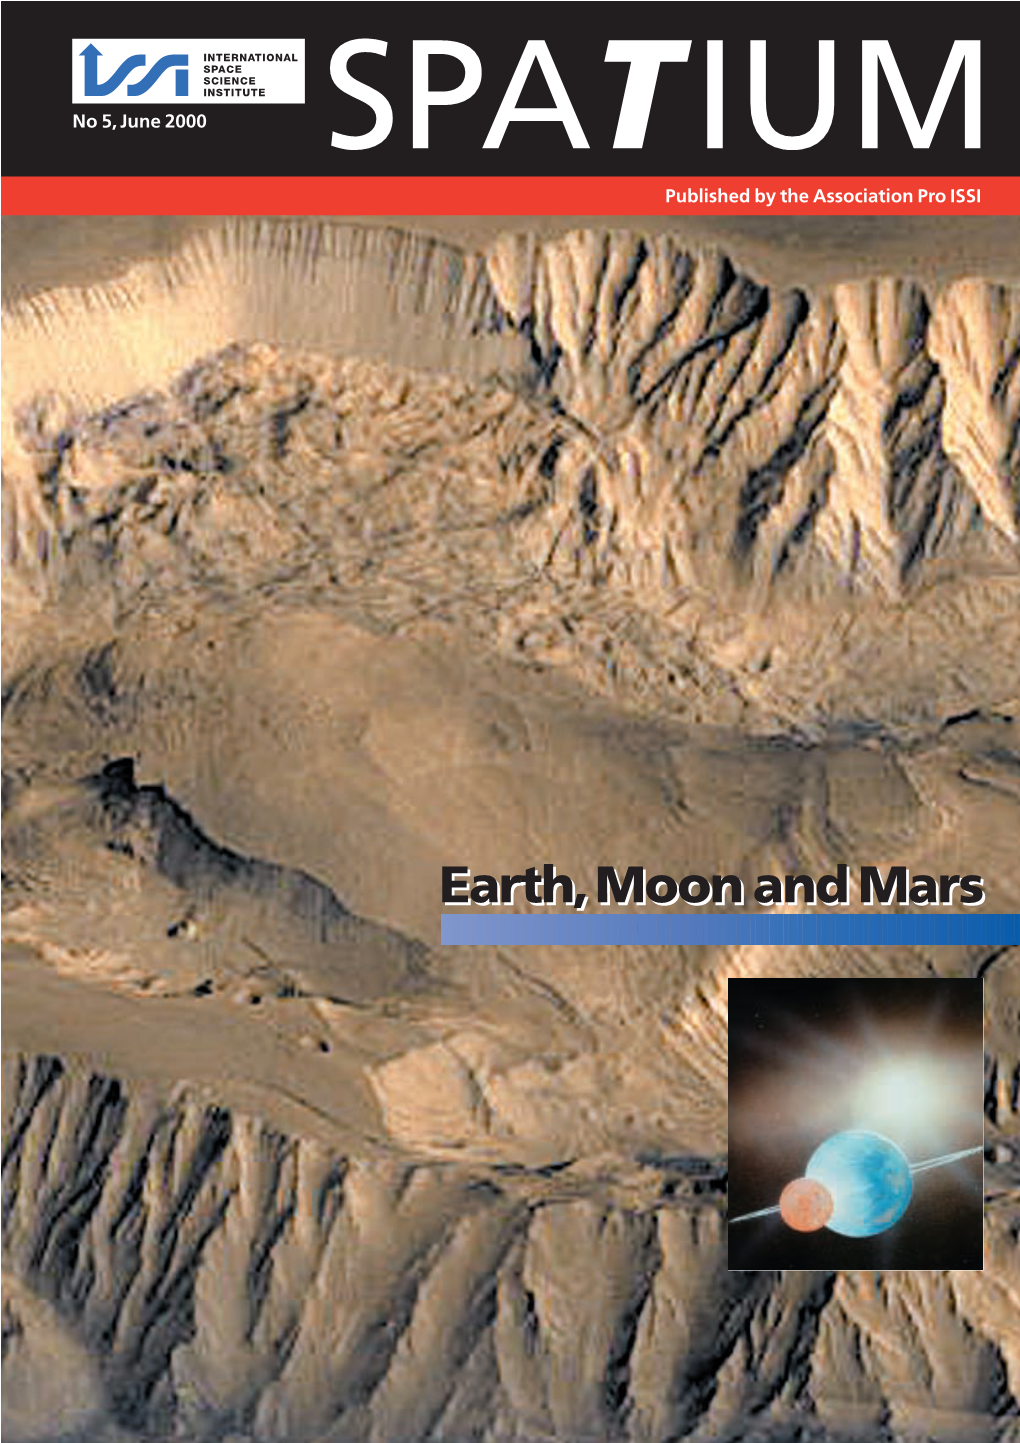 Earth, Moon and Mars, to Which the Present Issue of Spatium Is Devoted, and to Search There for Traces of Life